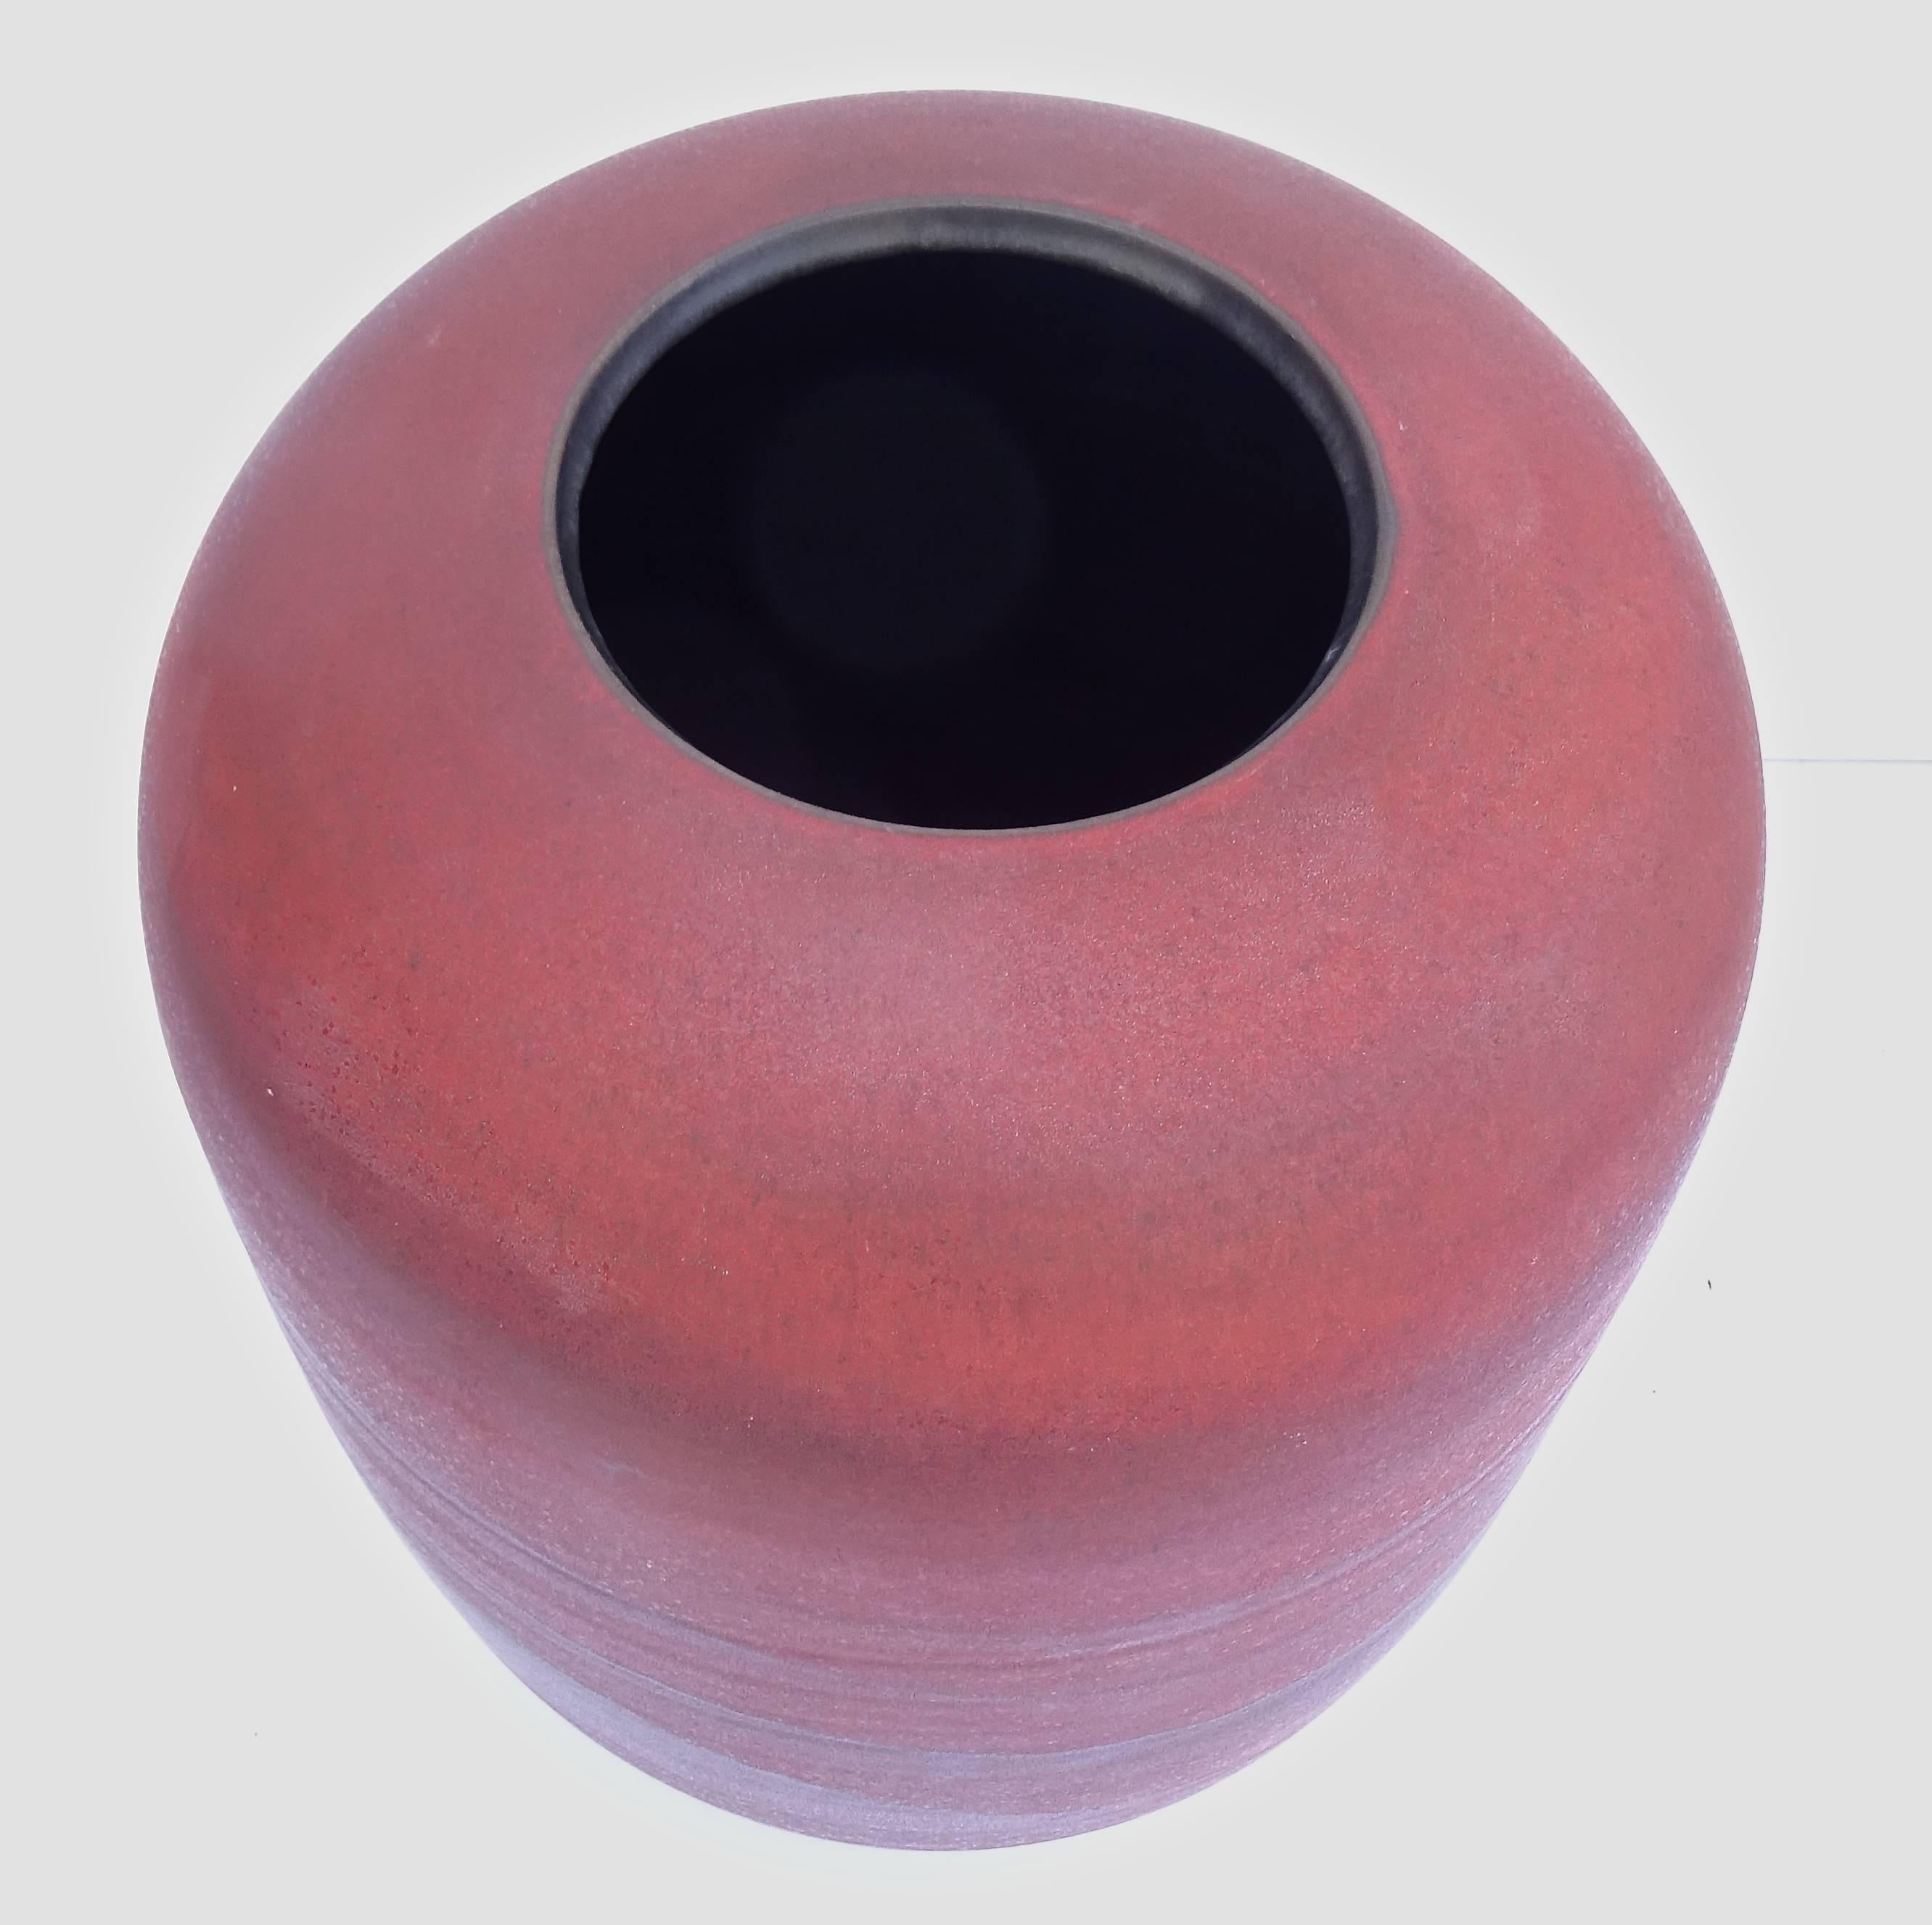 Fabulous hand thrown large scale vase, Germany, 1960's, with a deep complex tomato red matte glaze and gorgeous amorphous horizontal black decoration which evokes a skyline or horizon.  Interior has a black glaze.  Signed illegibly on the bottom, so